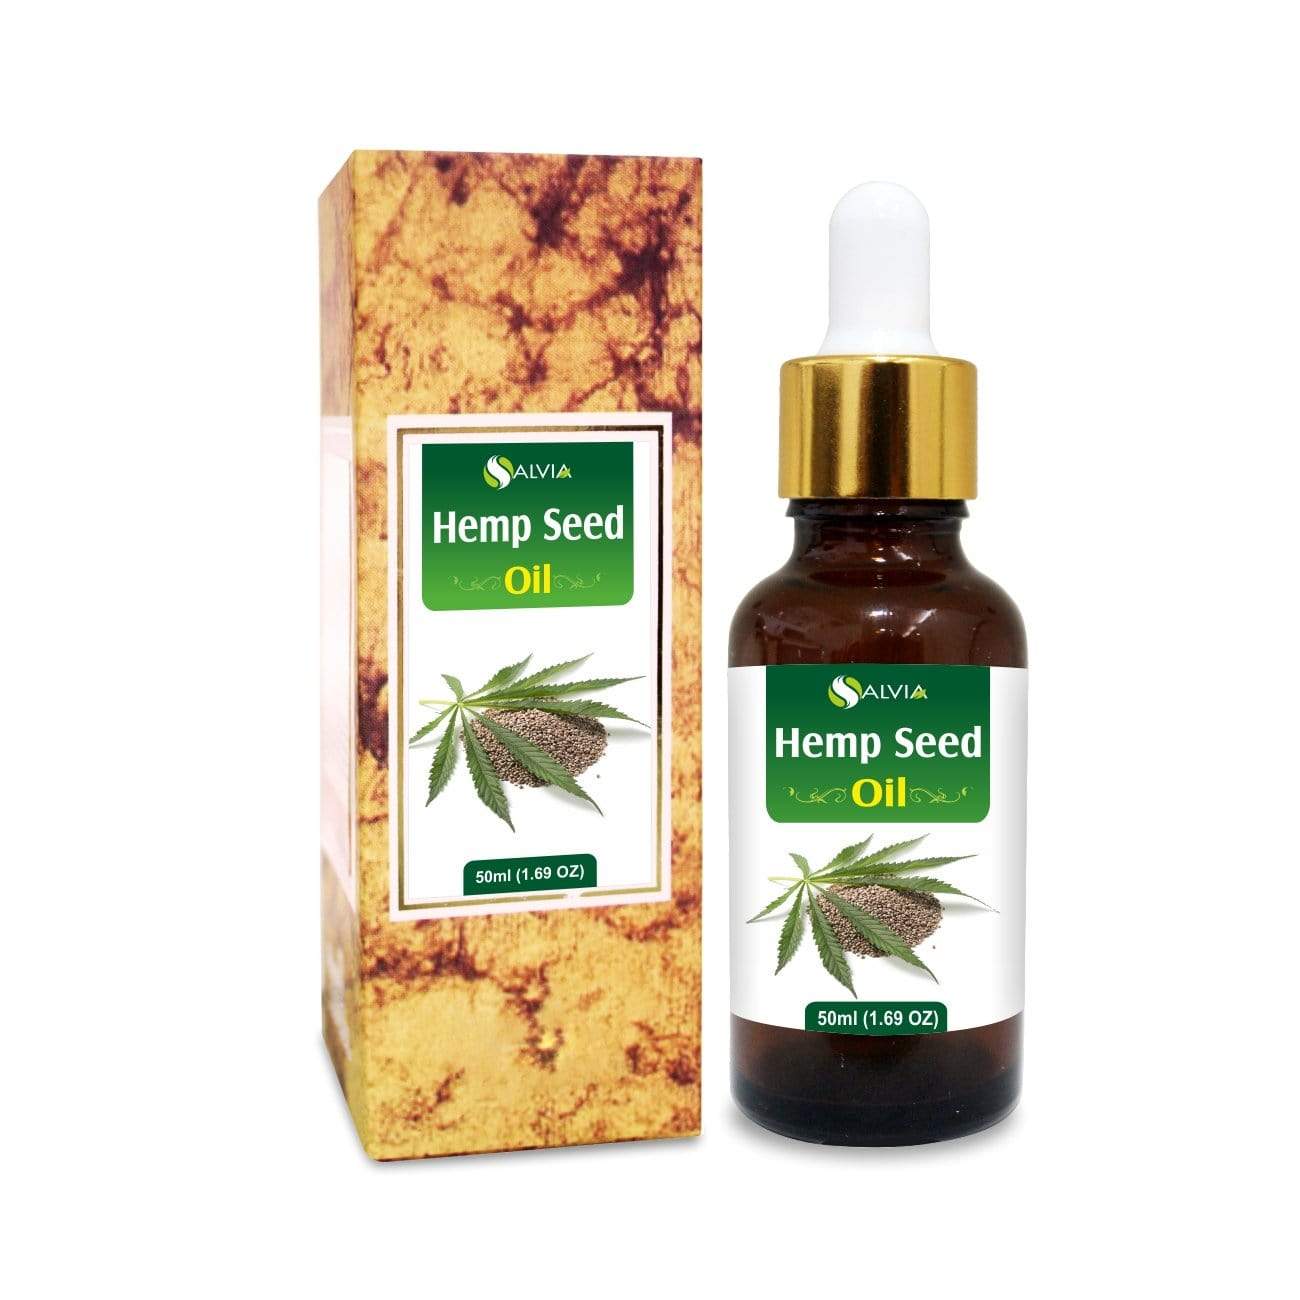 Salvia Natural Carrier Oils 50ml Hemp Seed Oil (Cannabis sativa) | Pure And Natural Non- comedogenic Seed Oil | Alleviate Dry Skin, Strengthen Nails And Heal Cuticles, Remove Makeup, Condition Hair, Reduce Acne